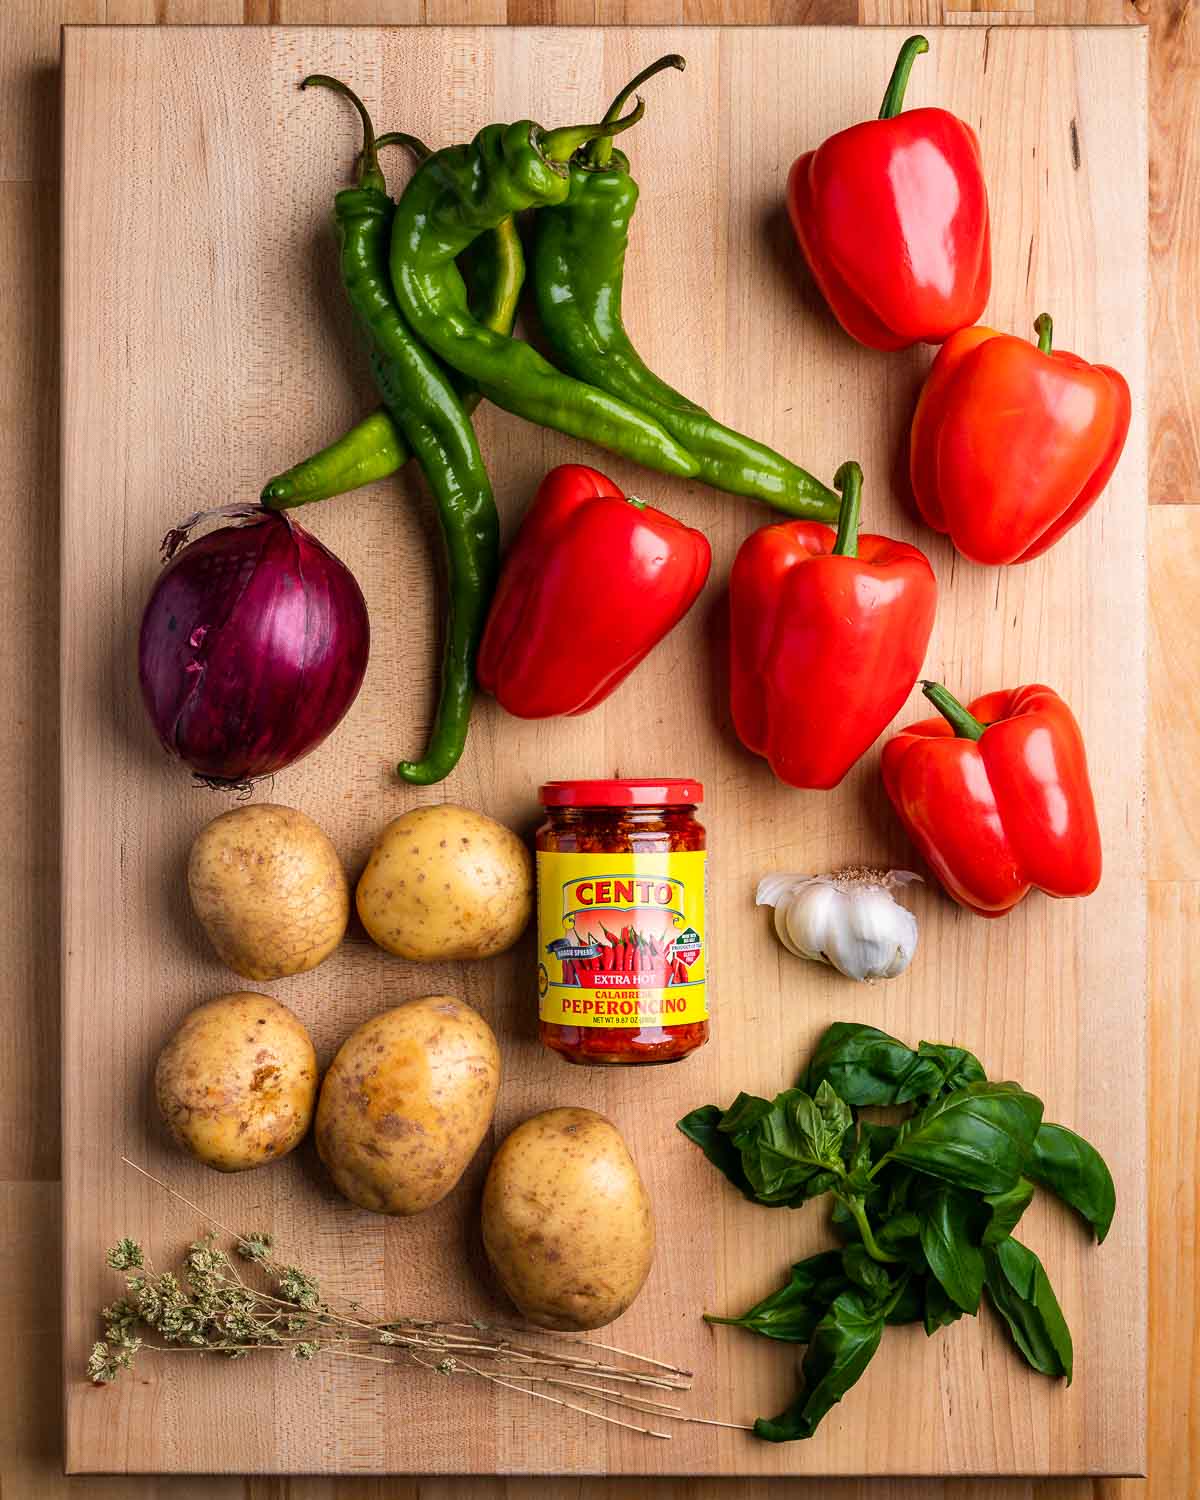 Ingredients shown: assorted peppers, red onion, potatoes, Calabrian chili paste, oregano, garlic, and basil.